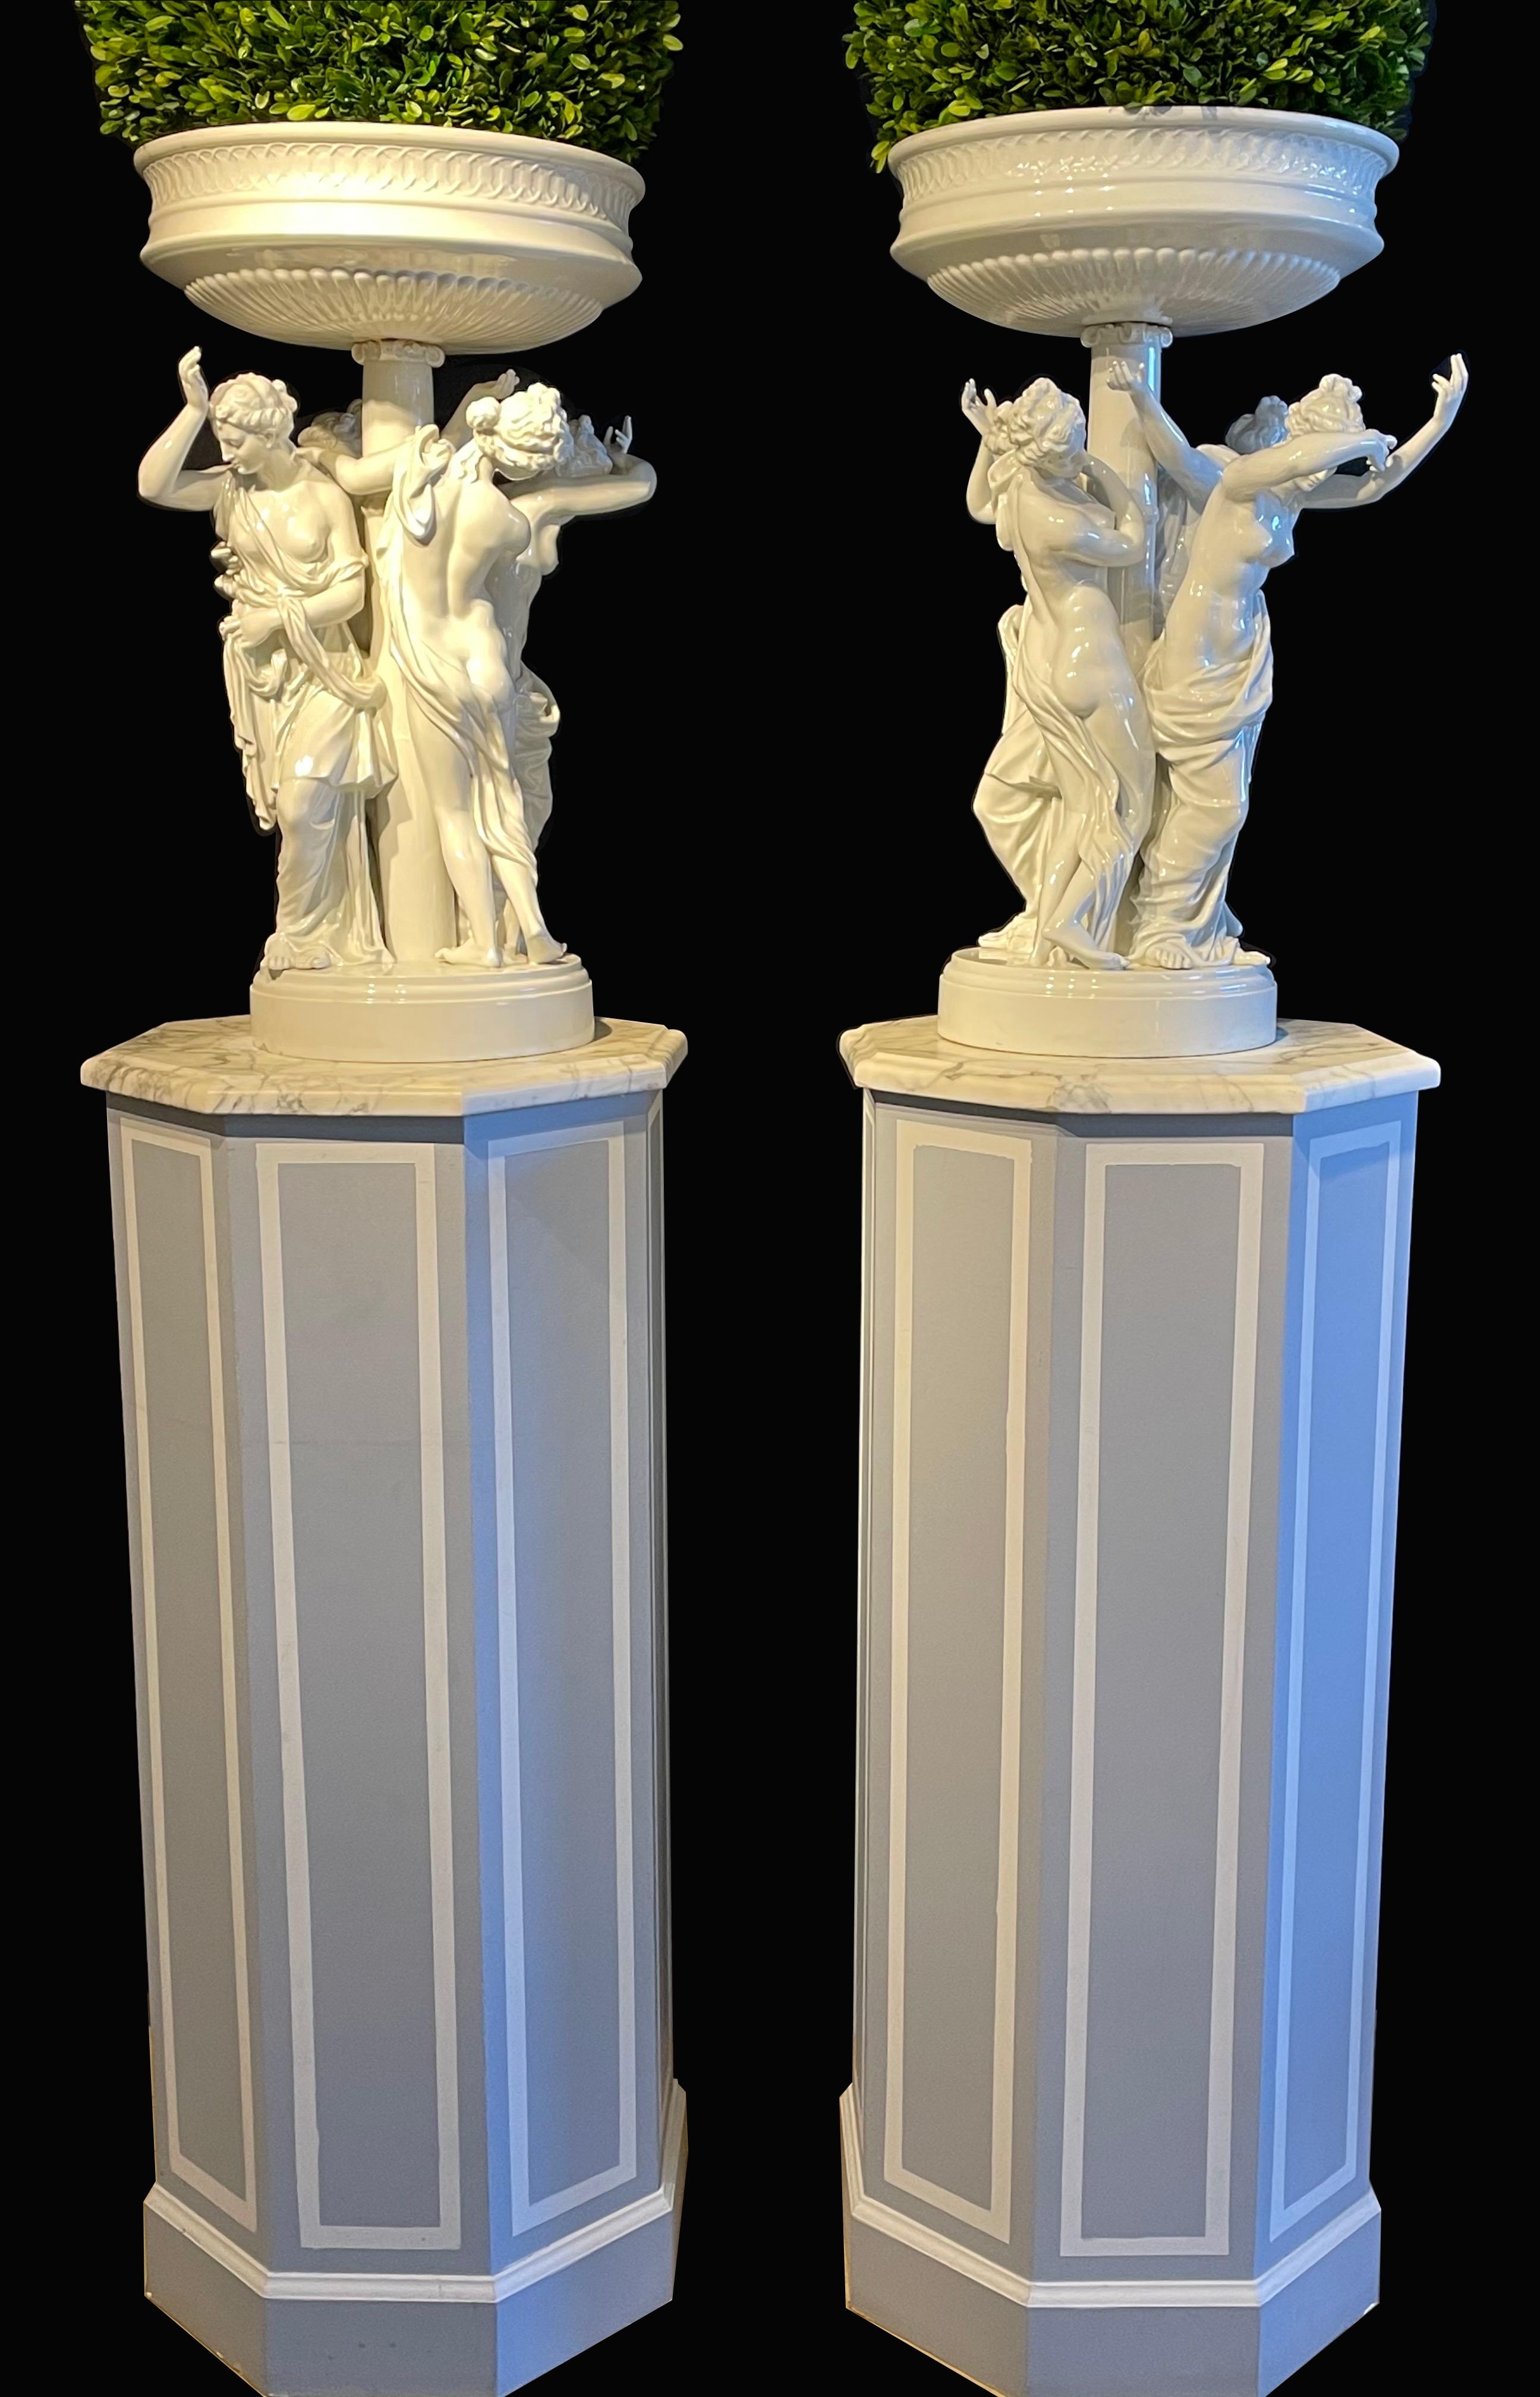 German Pair of Antique Dresden Planters Jardinières, Each with Four Dancing Nymphs